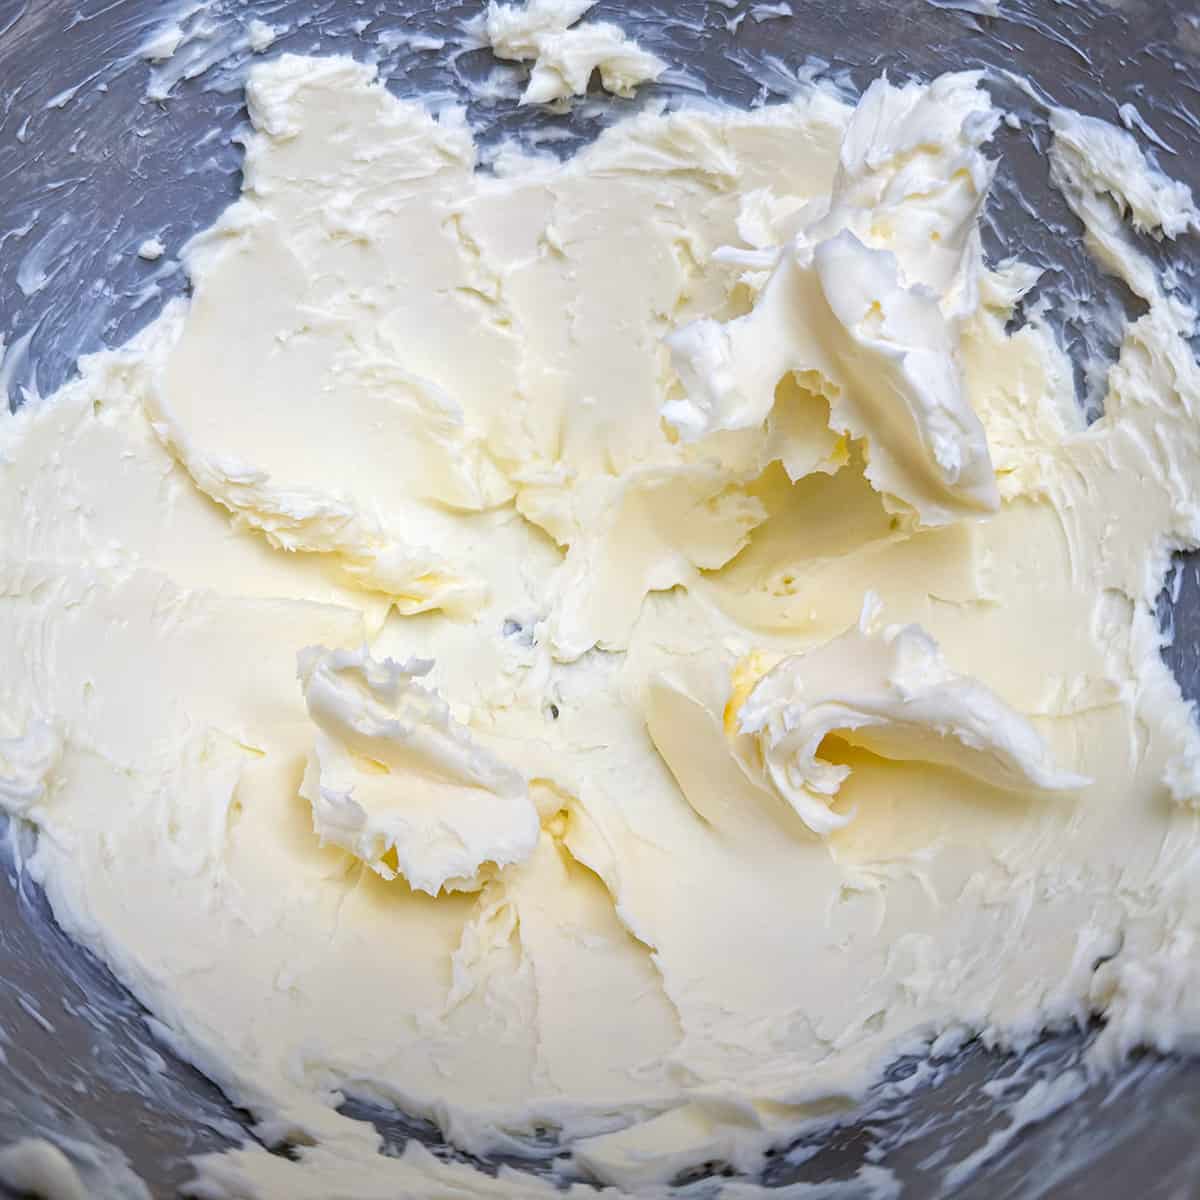 Creaming butter in a mixer.